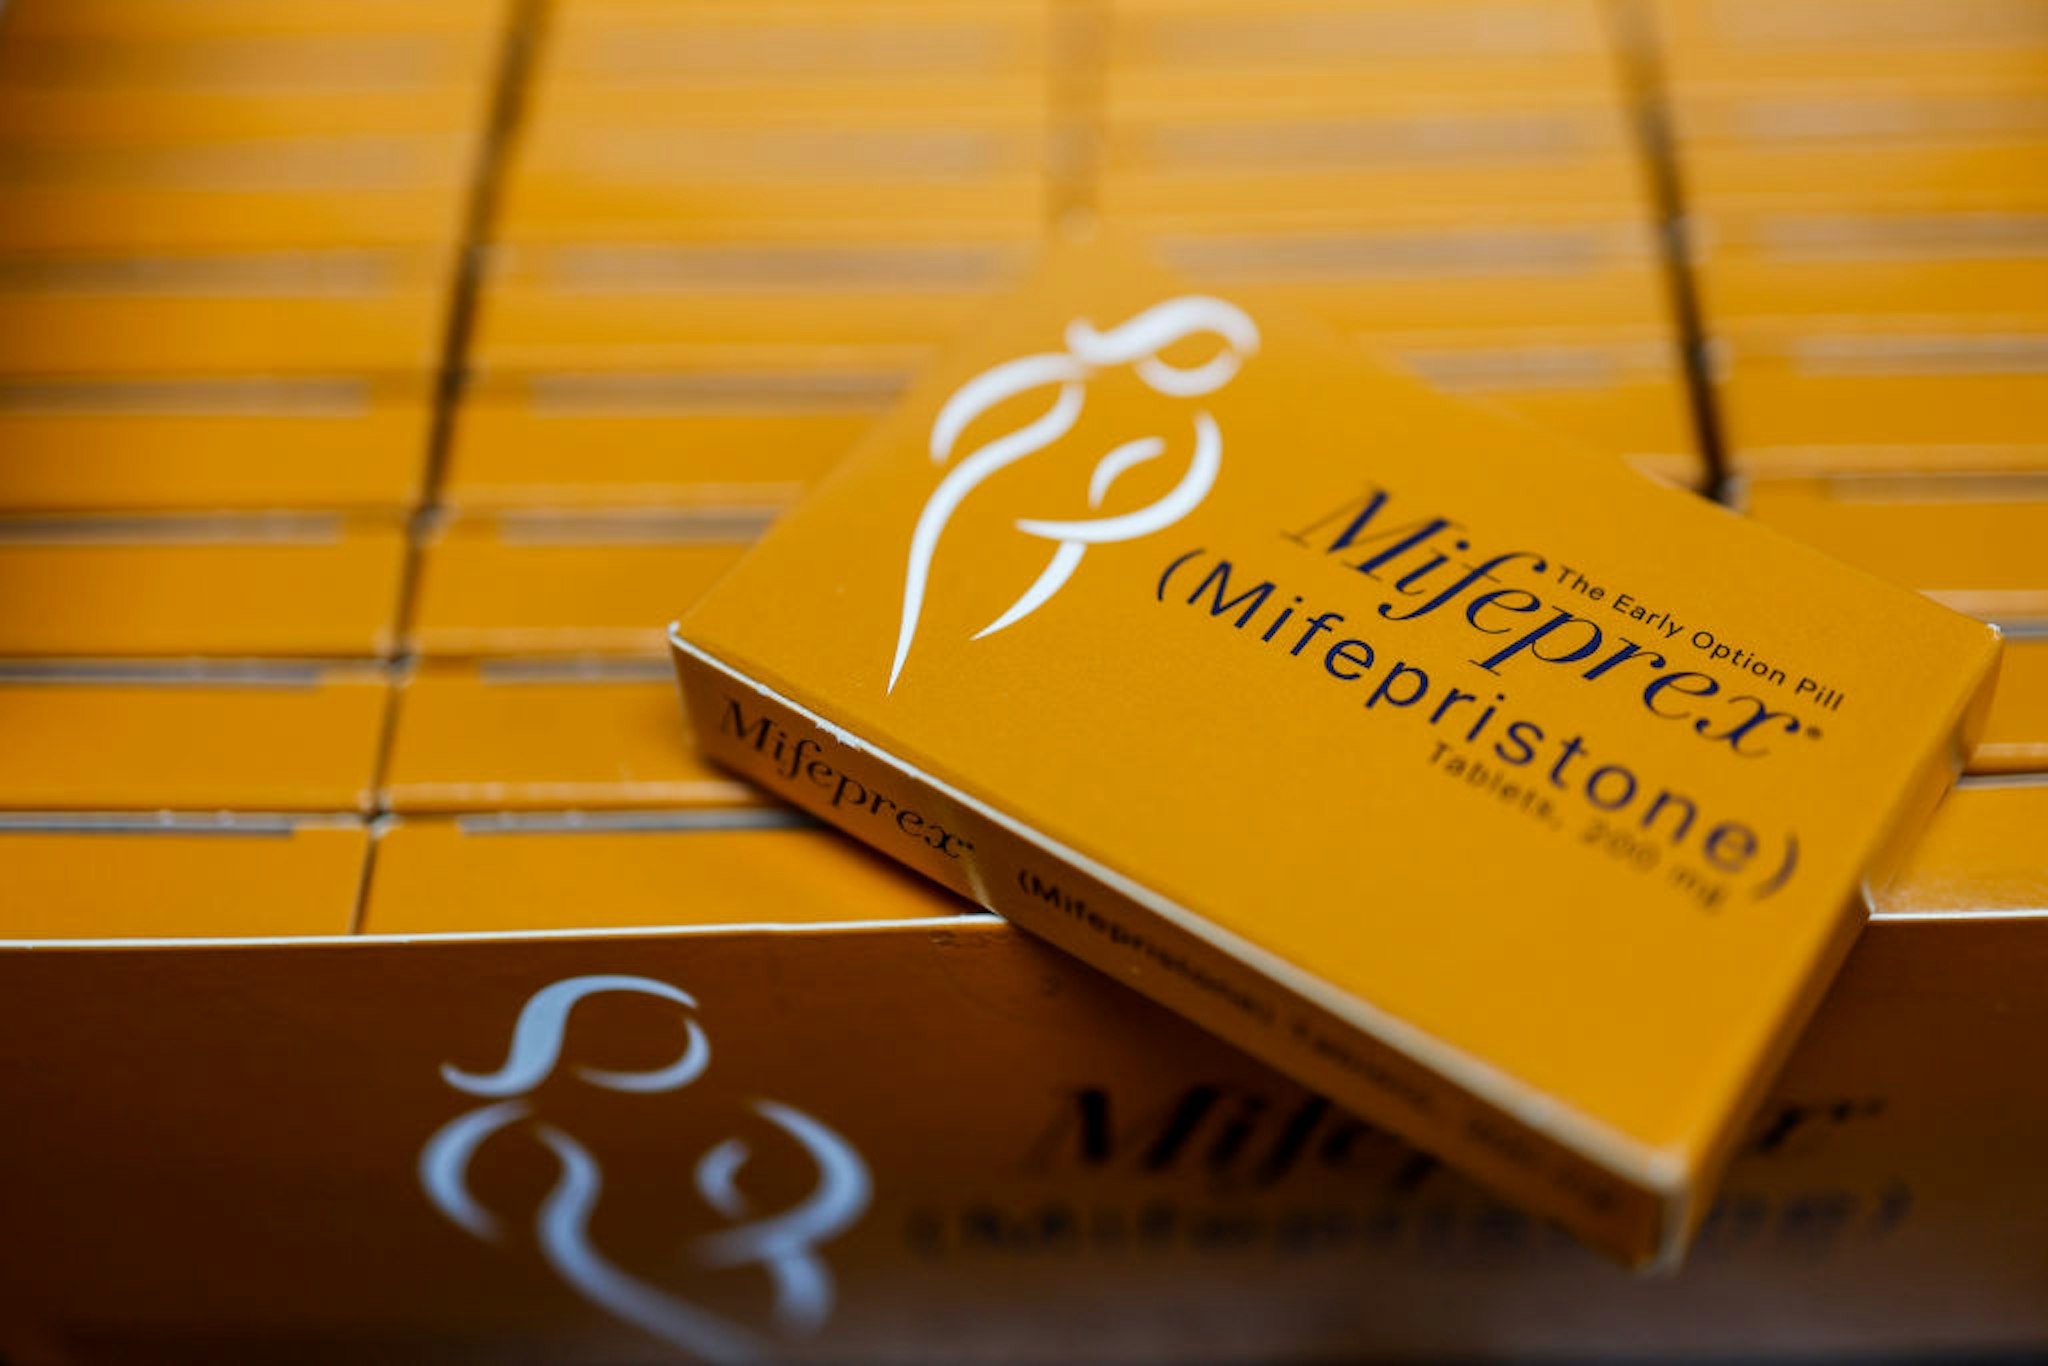 ROCKVILLE, MARYLAND - APRIL 13: In this photo illustration, packages of Mifepristone tablets are displayed at a family planning clinic on April 13, 2023 in Rockville, Maryland. A Massachusetts appeals court temporarily blocked a Texas-based federal judge’s ruling that suspended the FDA’s approval of the abortion drug Mifepristone, which is part of a two-drug regimen to induce an abortion in the first trimester of pregnancy in combination with the drug Misoprostol. (Photo illustration by Anna Moneymaker/Getty Images)